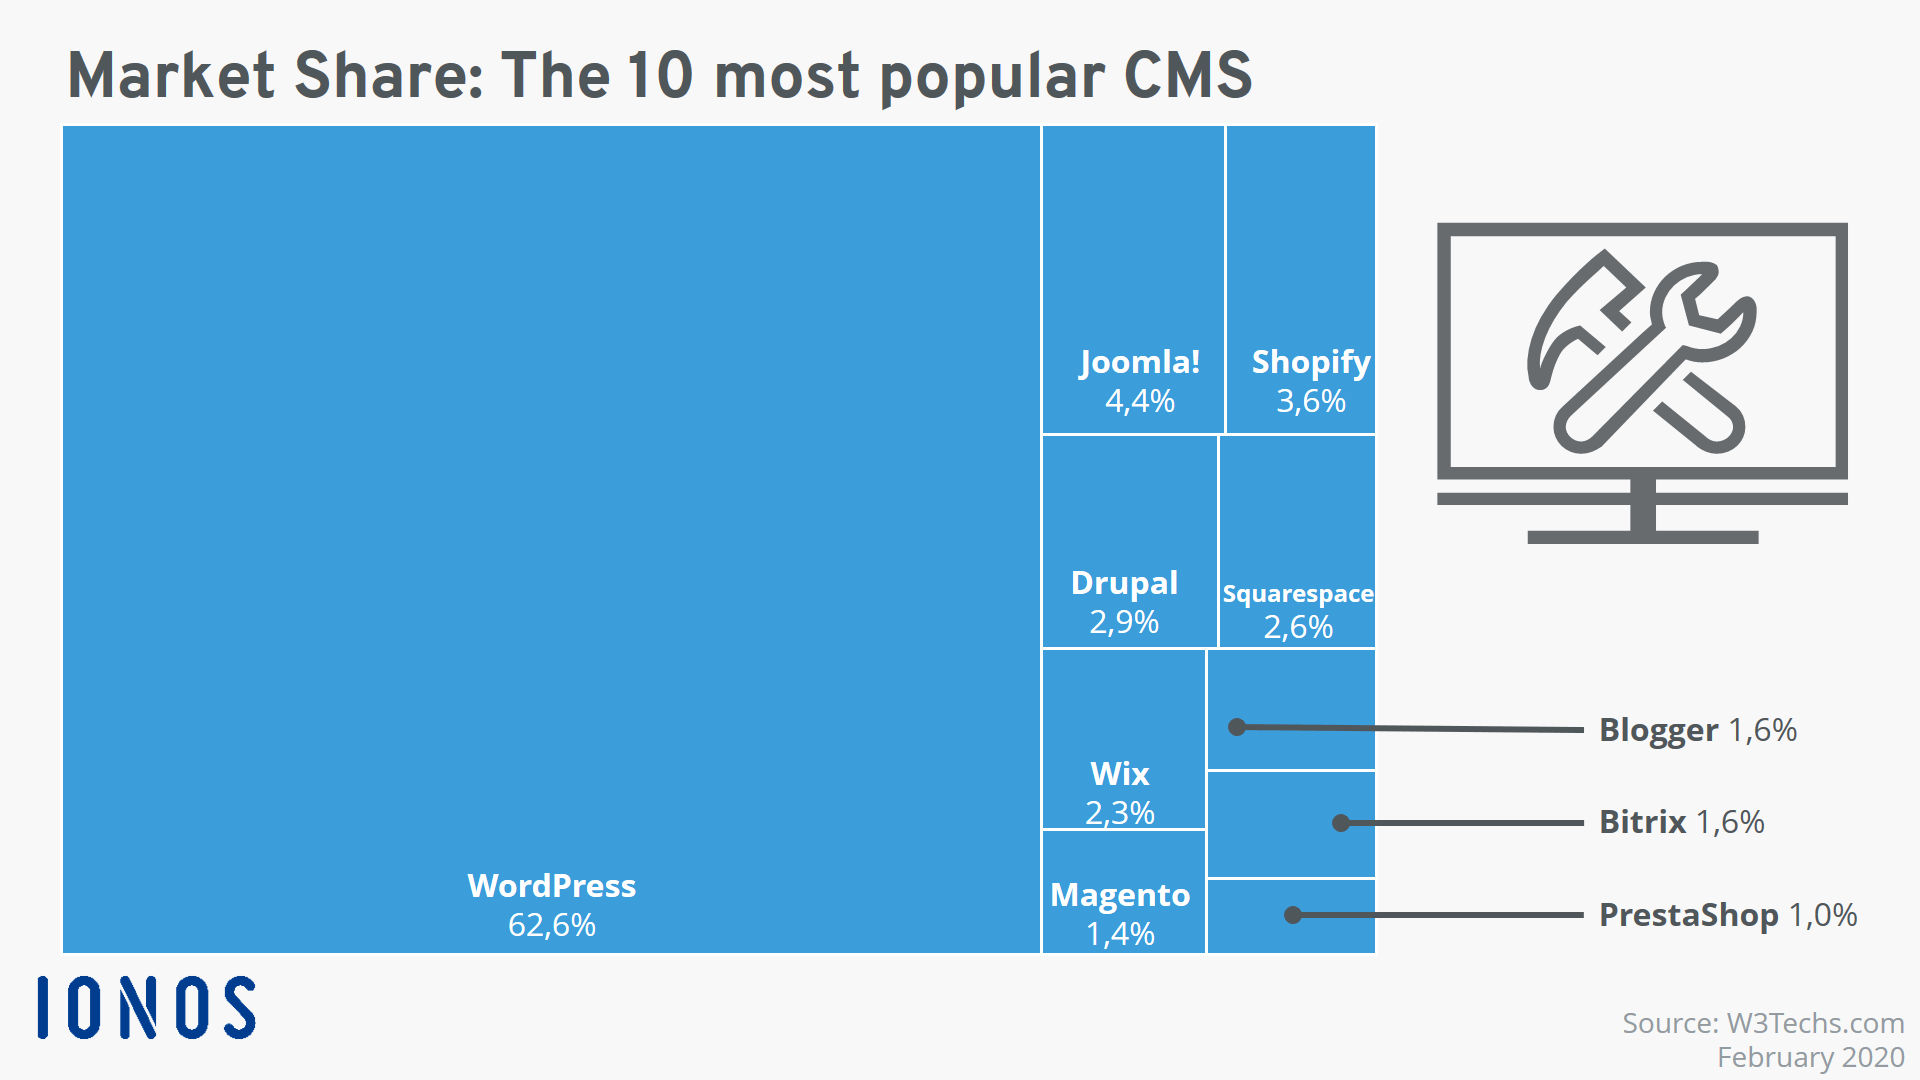 The most popular CMS software solutions in comparison